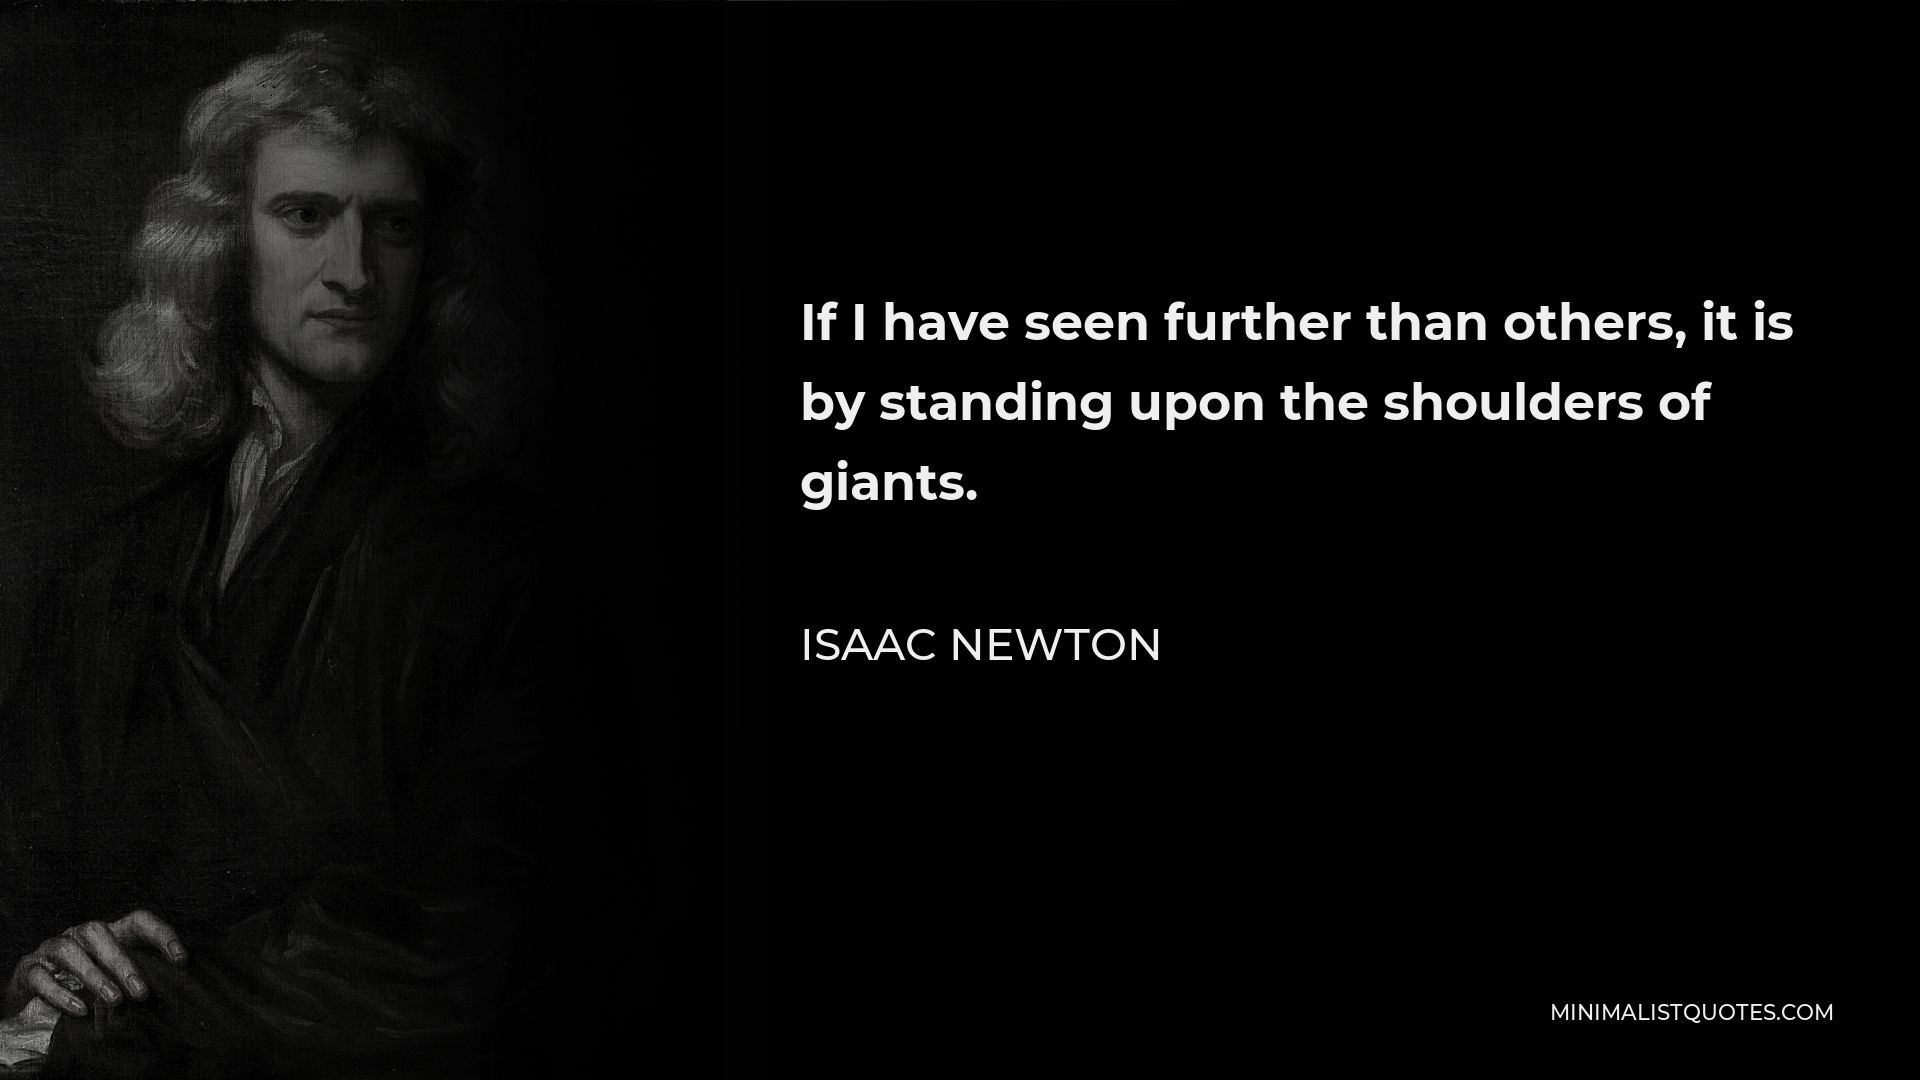 Isaac Newton Quote - If I have seen further than others, it is by standing upon the shoulders of giants.